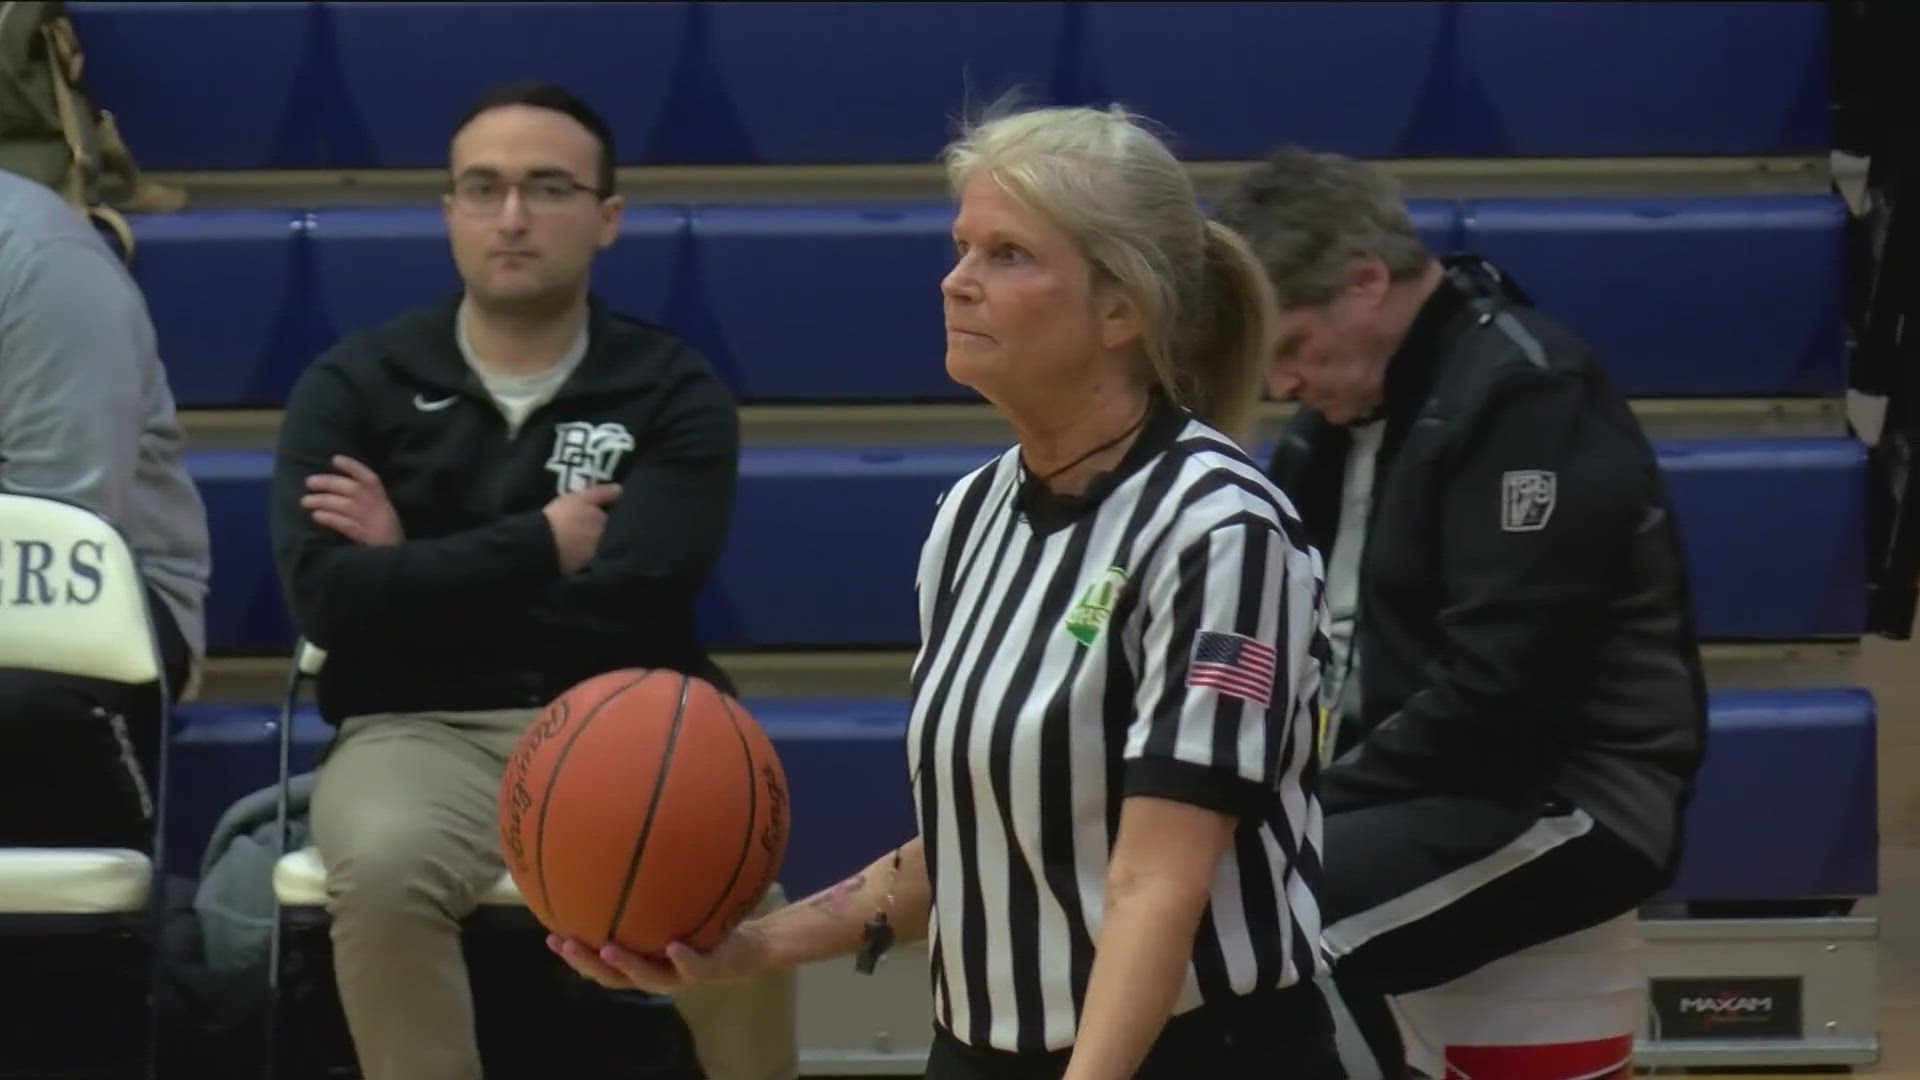 The Monroe native has been officiating high school basketball for over 30 years and is a member of the Northwest Ohio District Basketball Association Hall of Fame.